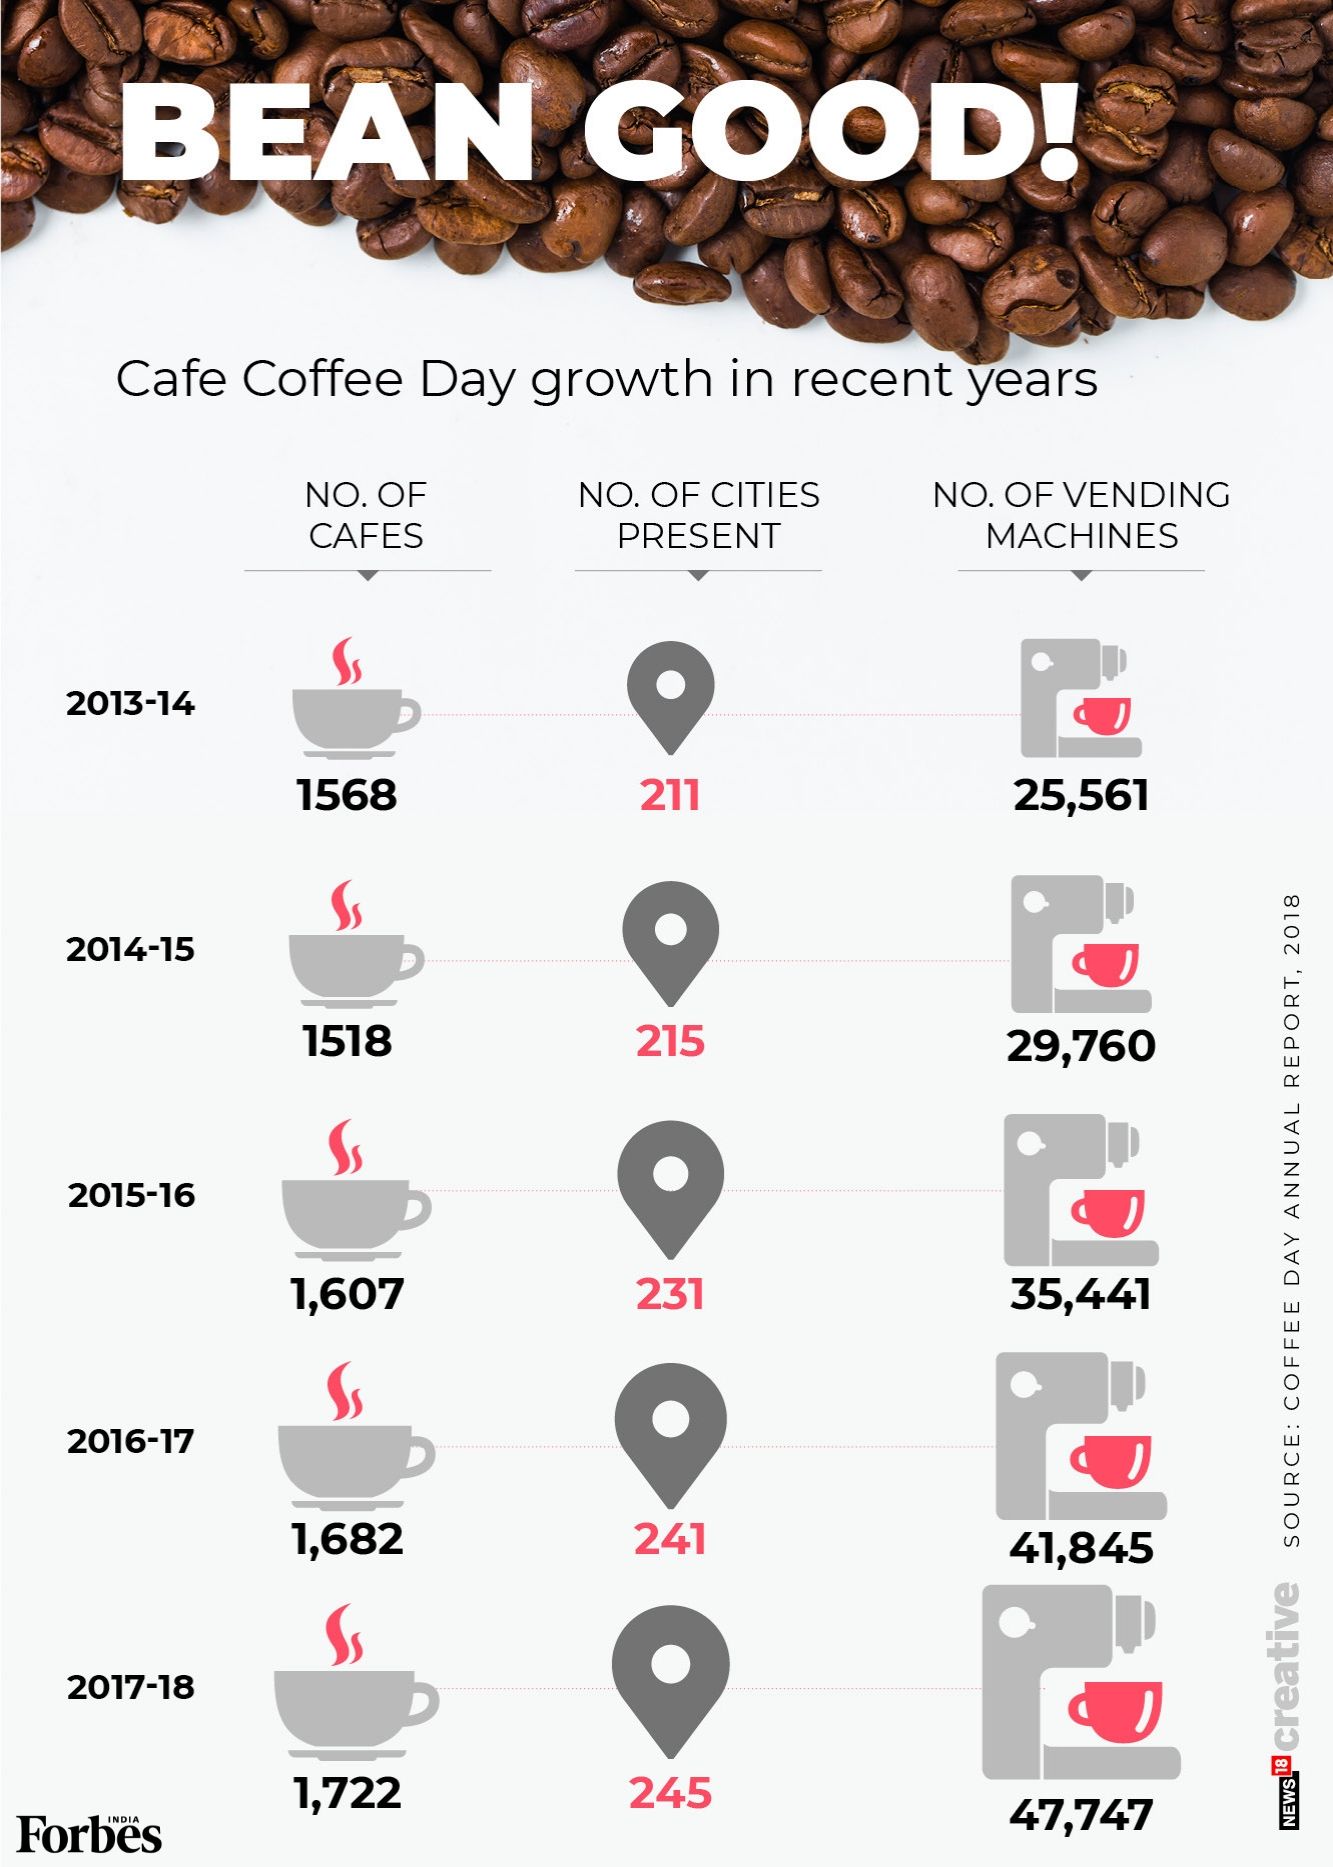 Cafe Coffee Day: Growth in recent years